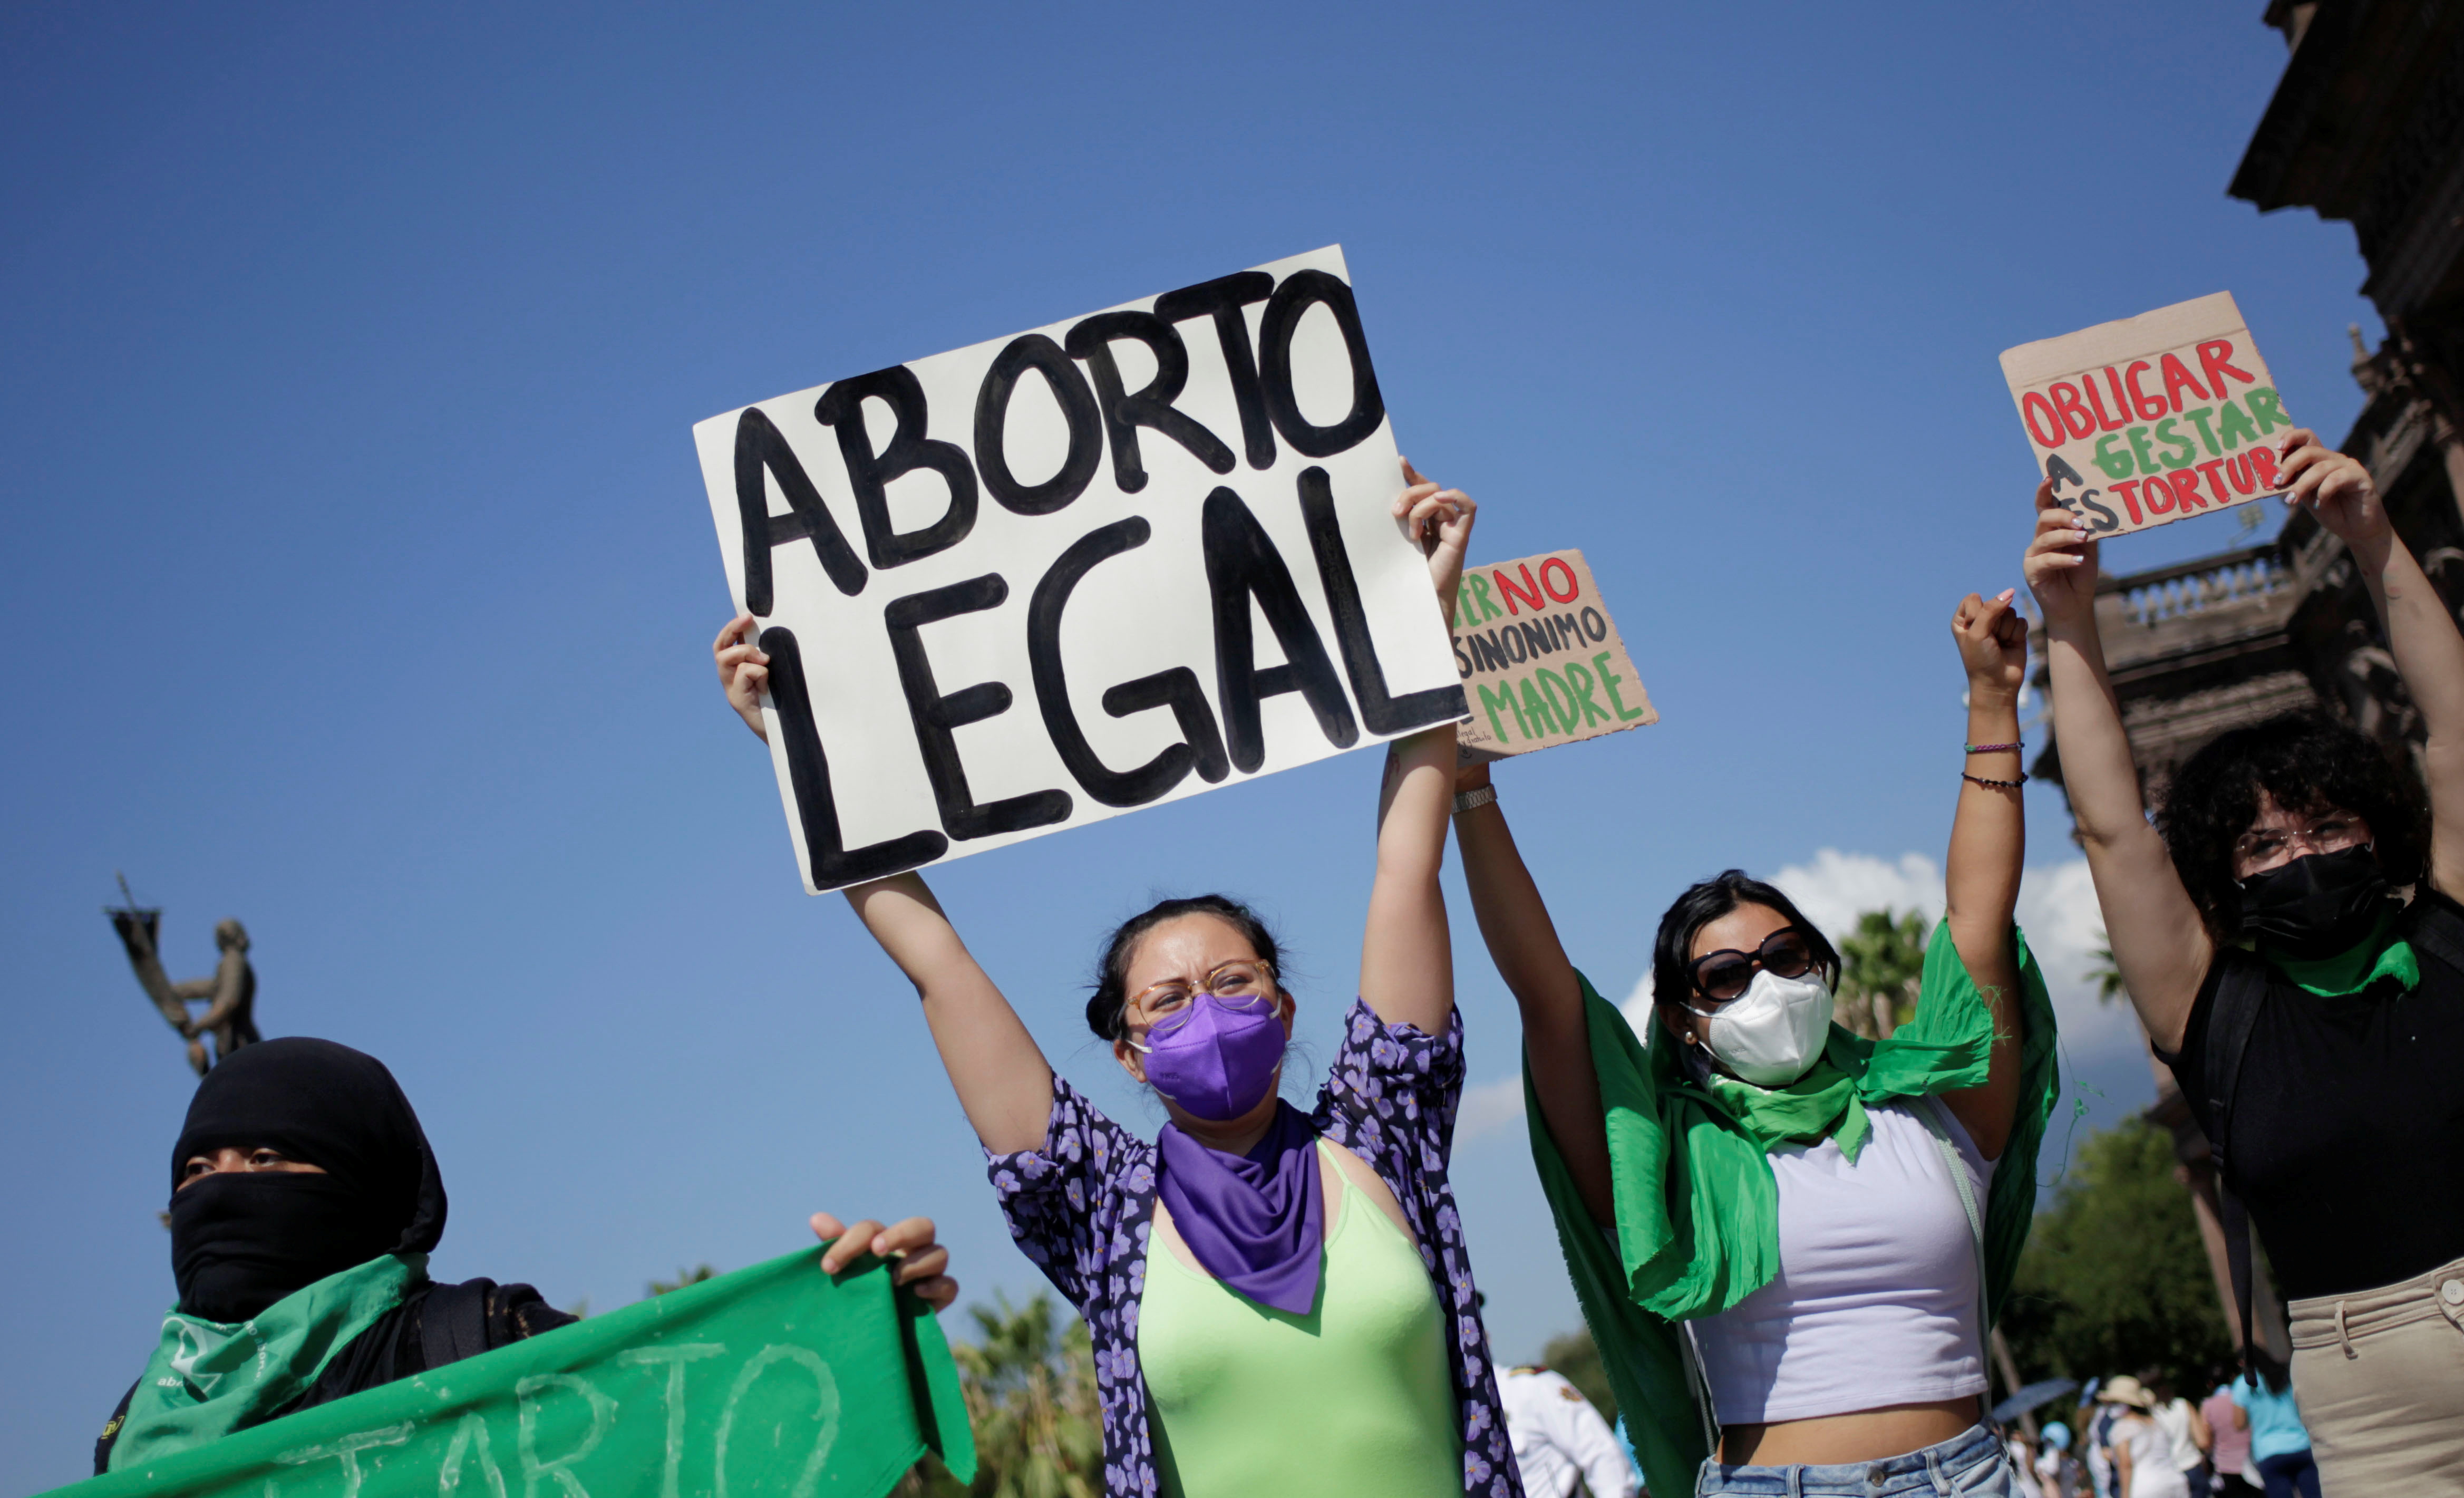 Pro-abortion activists hold up banners during a protest against abortion, in Monterrey